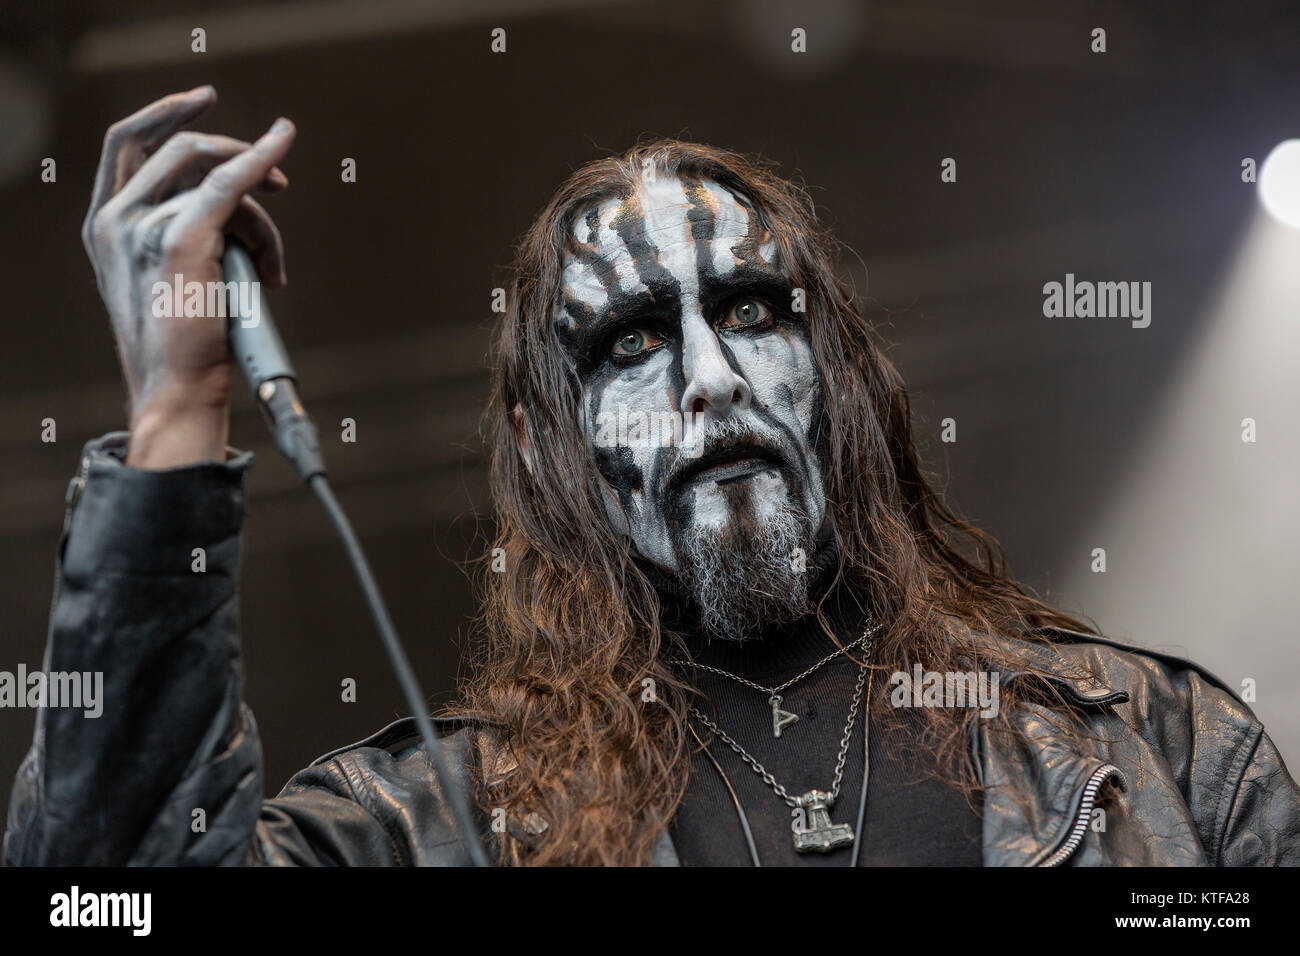 Norway, Borre – August 18, 2017. The Norwegian black metal band Gaahls Wyrd performs a live concert during the Norwegian metal festival Midgardsblot Festival 2017 in Borre. Here vocalist Gaahl is seen live on stage. (Photocredit: Terje Dokken). Stock Photo